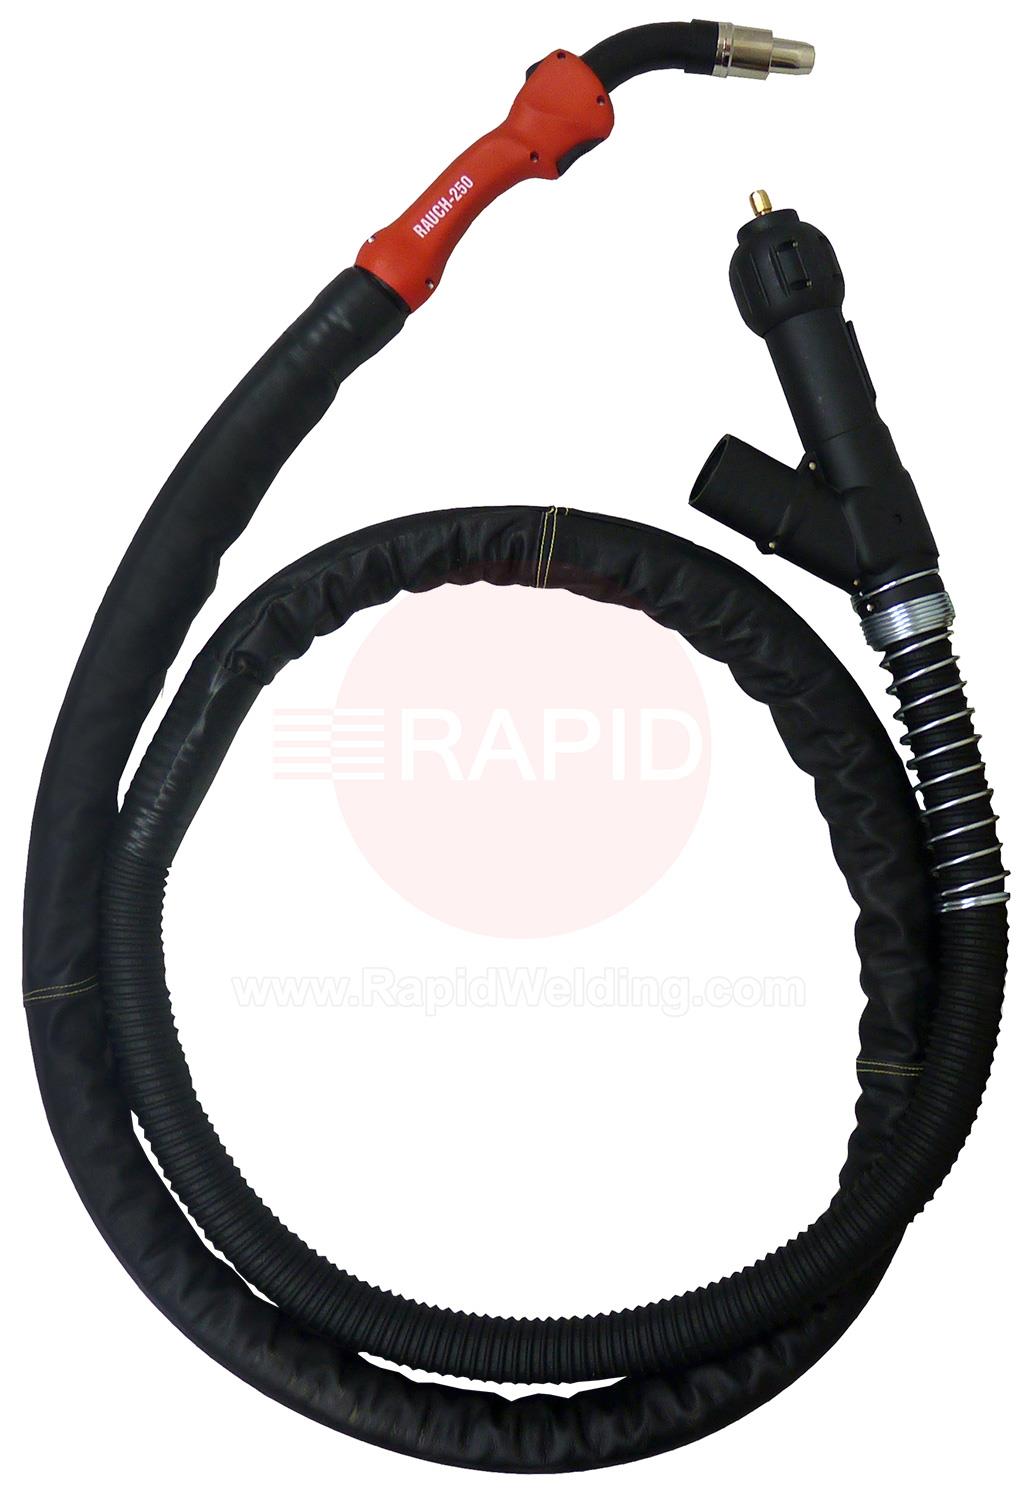 R2500511  MHS Smoke-250 Fume Extraction Air Cooled MIG Torch, 250A with Exhaust & Euro Connection - 5m